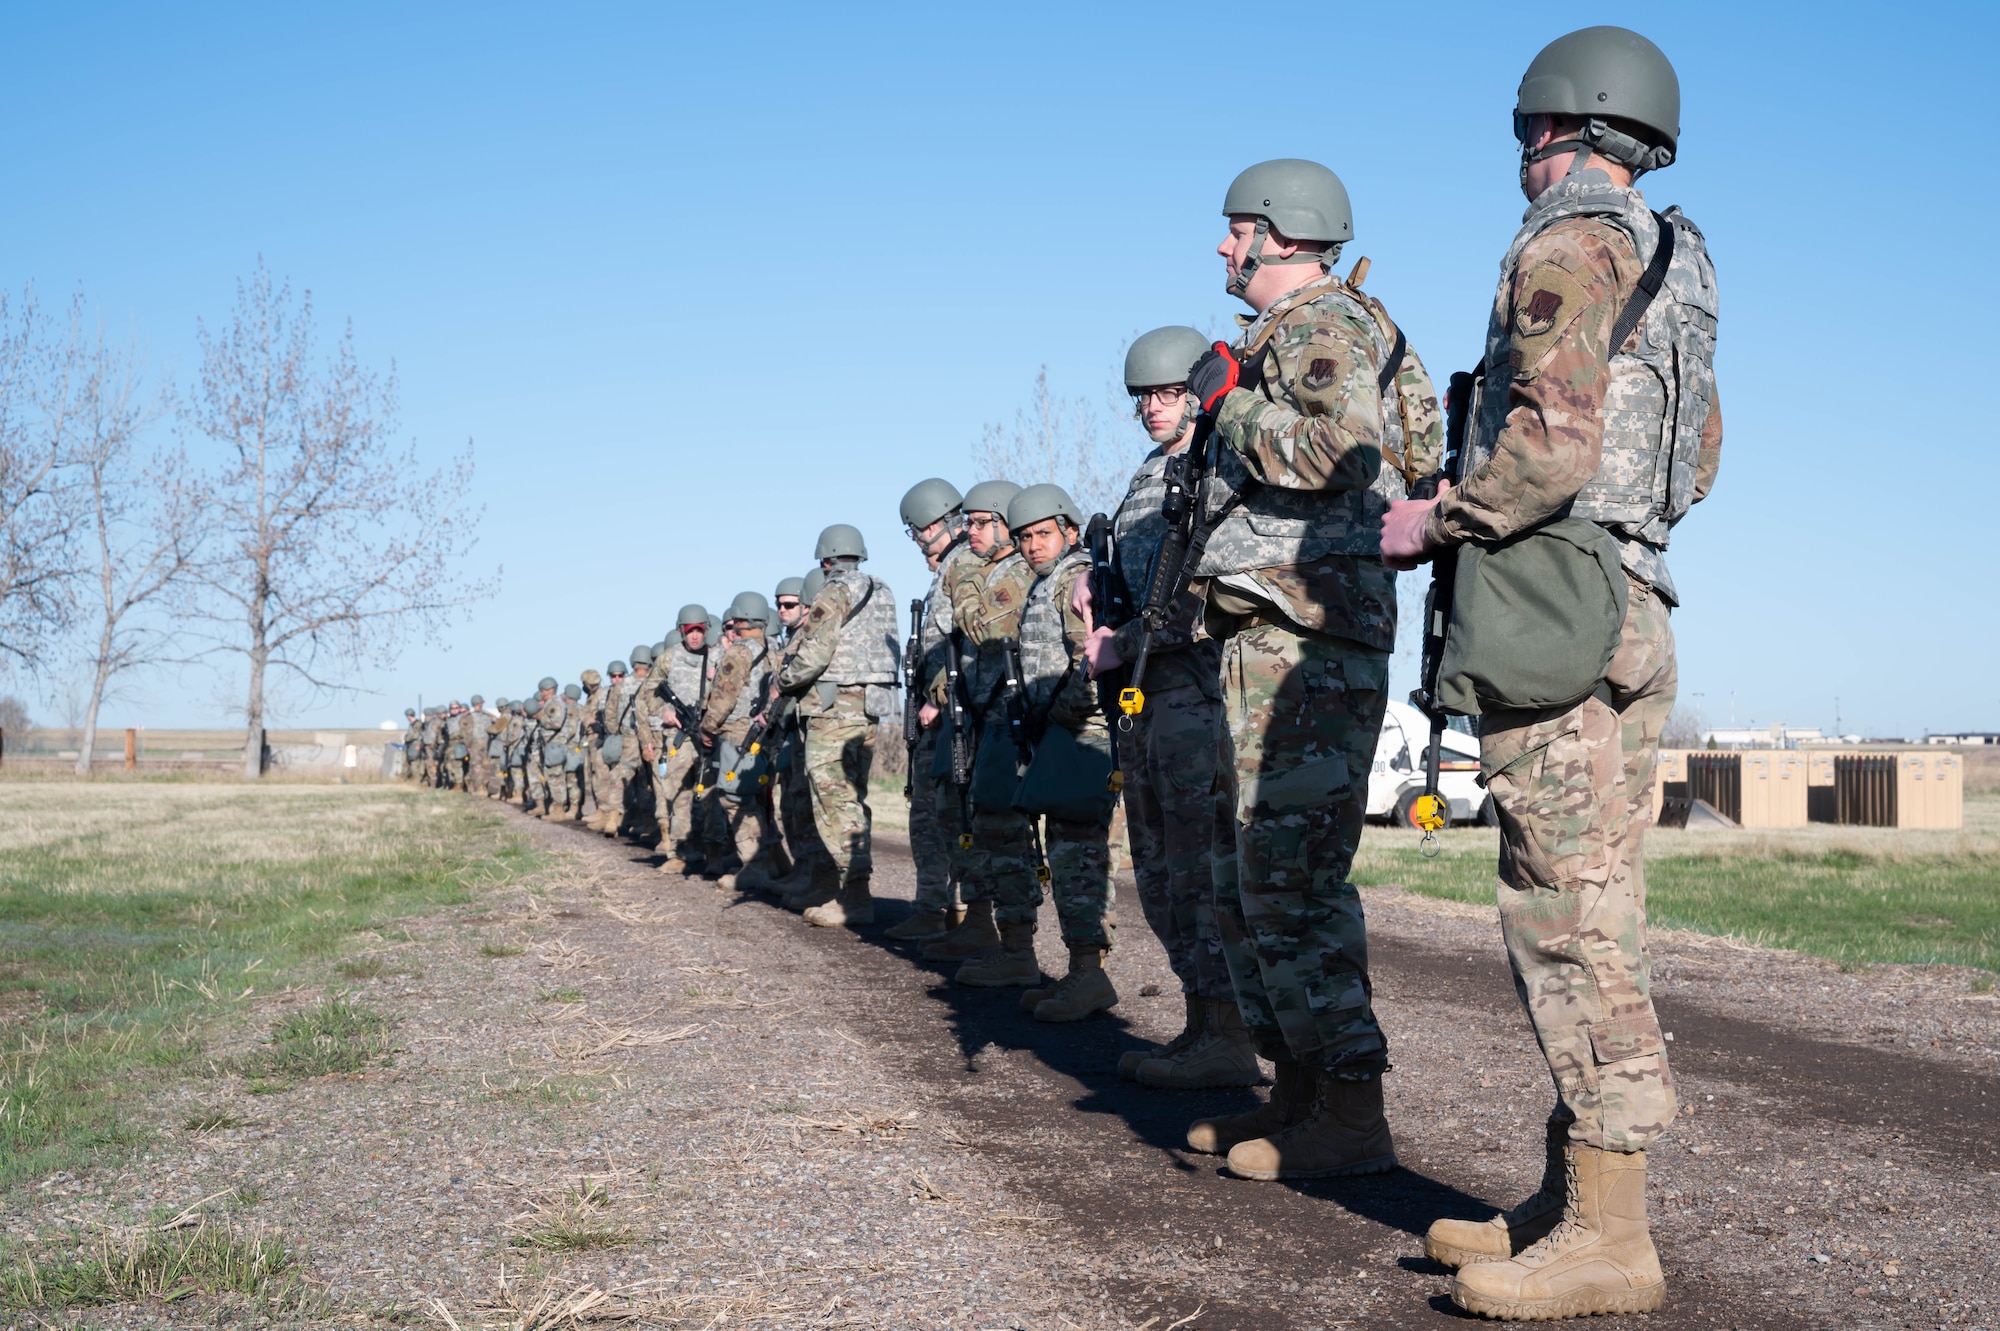 Airmen from the 819th RED HORSE Squadron prepare to perform a security sweep of the area to check for hazards during an exercise May 3, 2021, at Malmstrom Air Force Base, Mont.